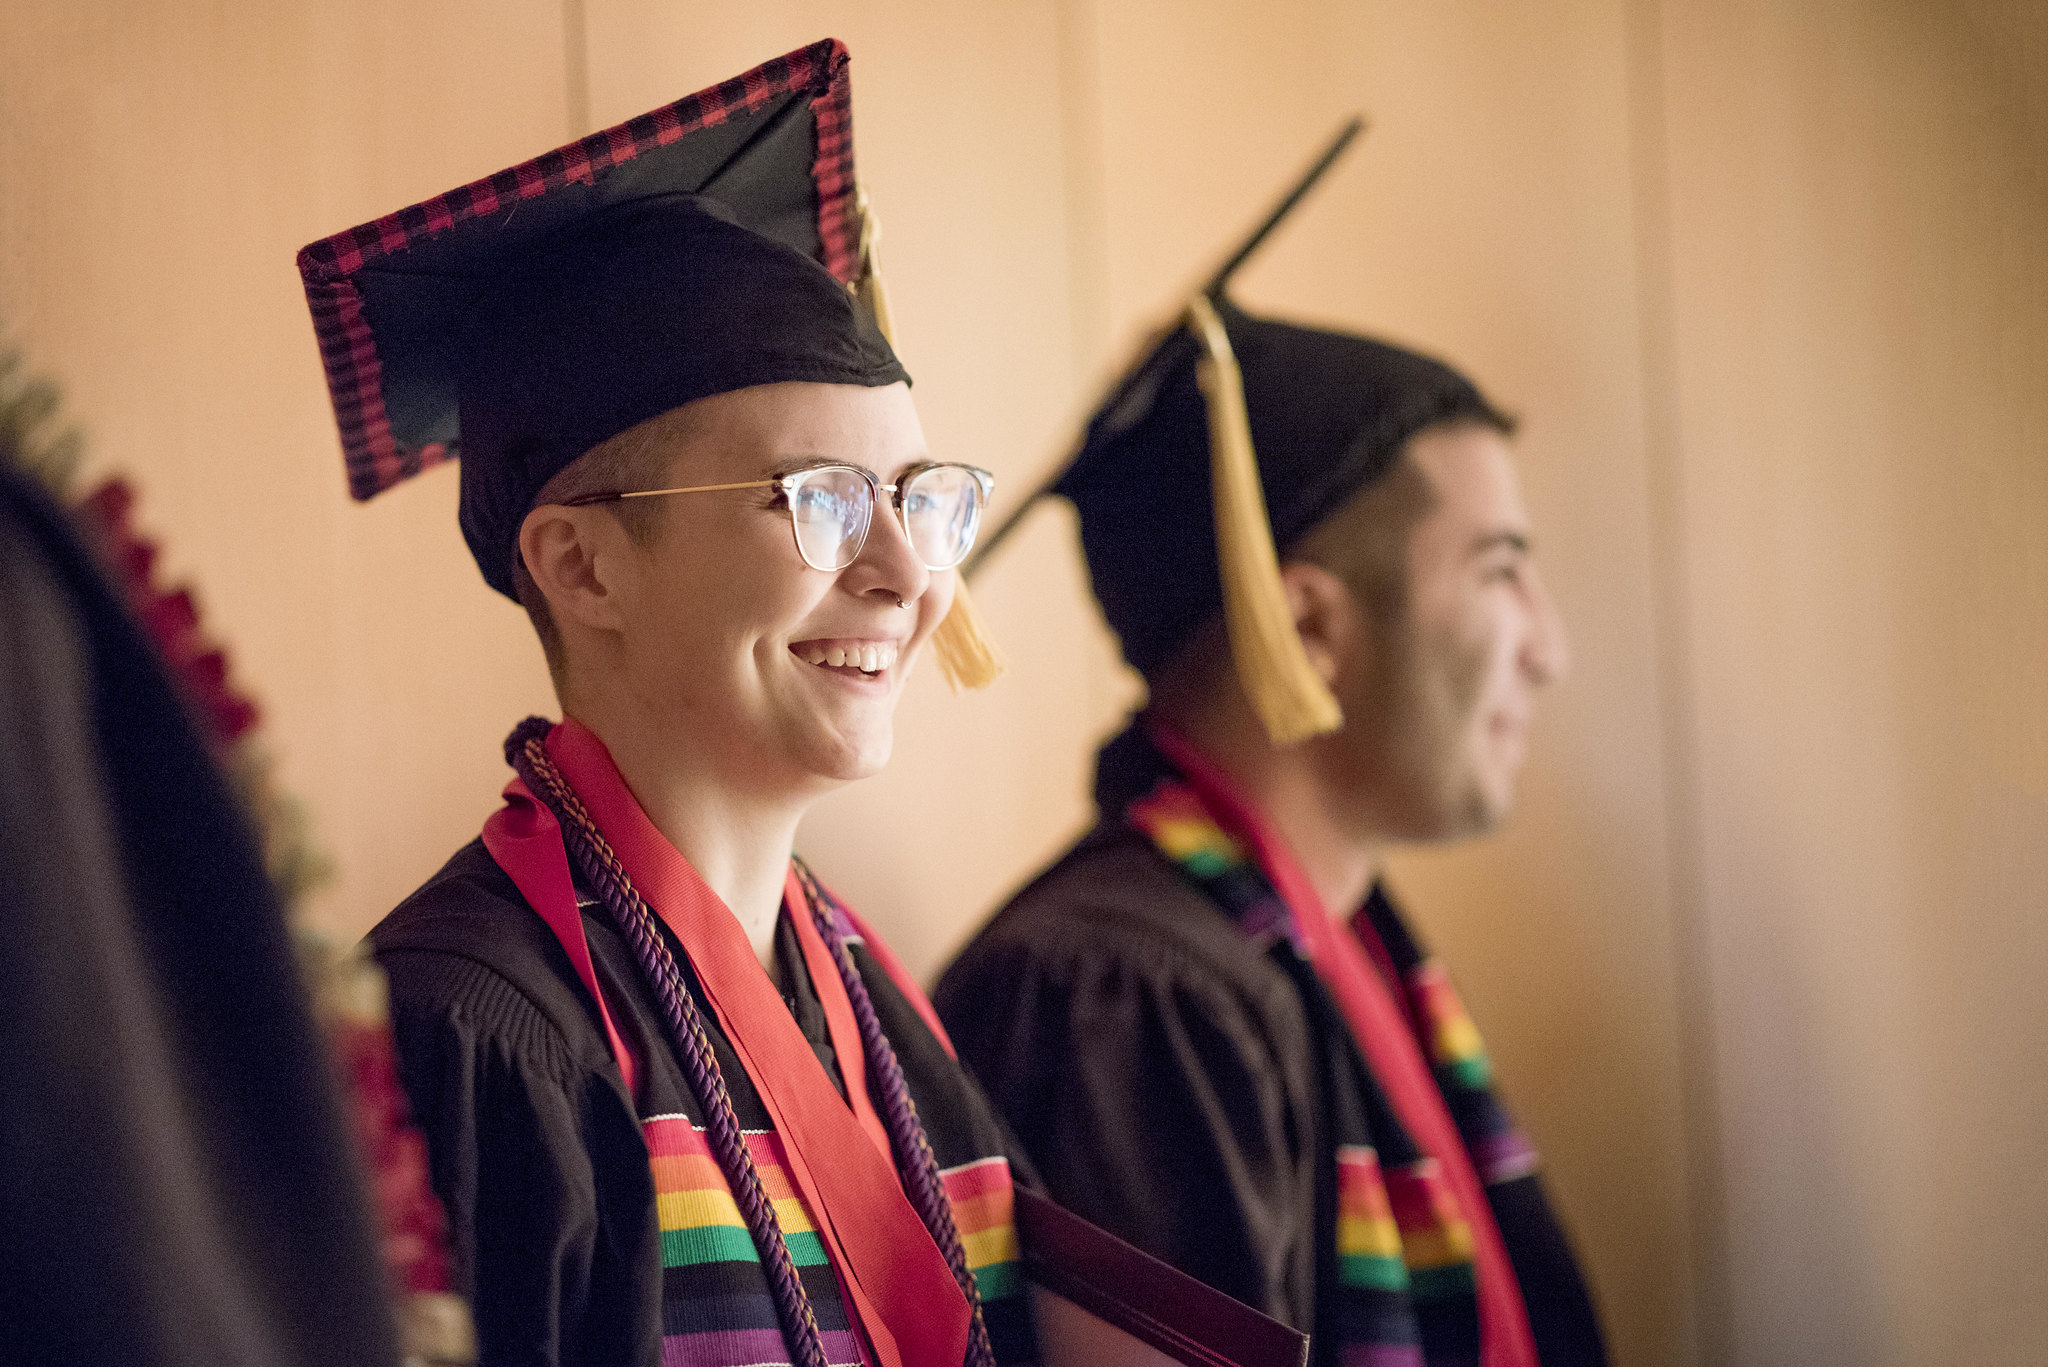 Students smiling while wearing mortar boards